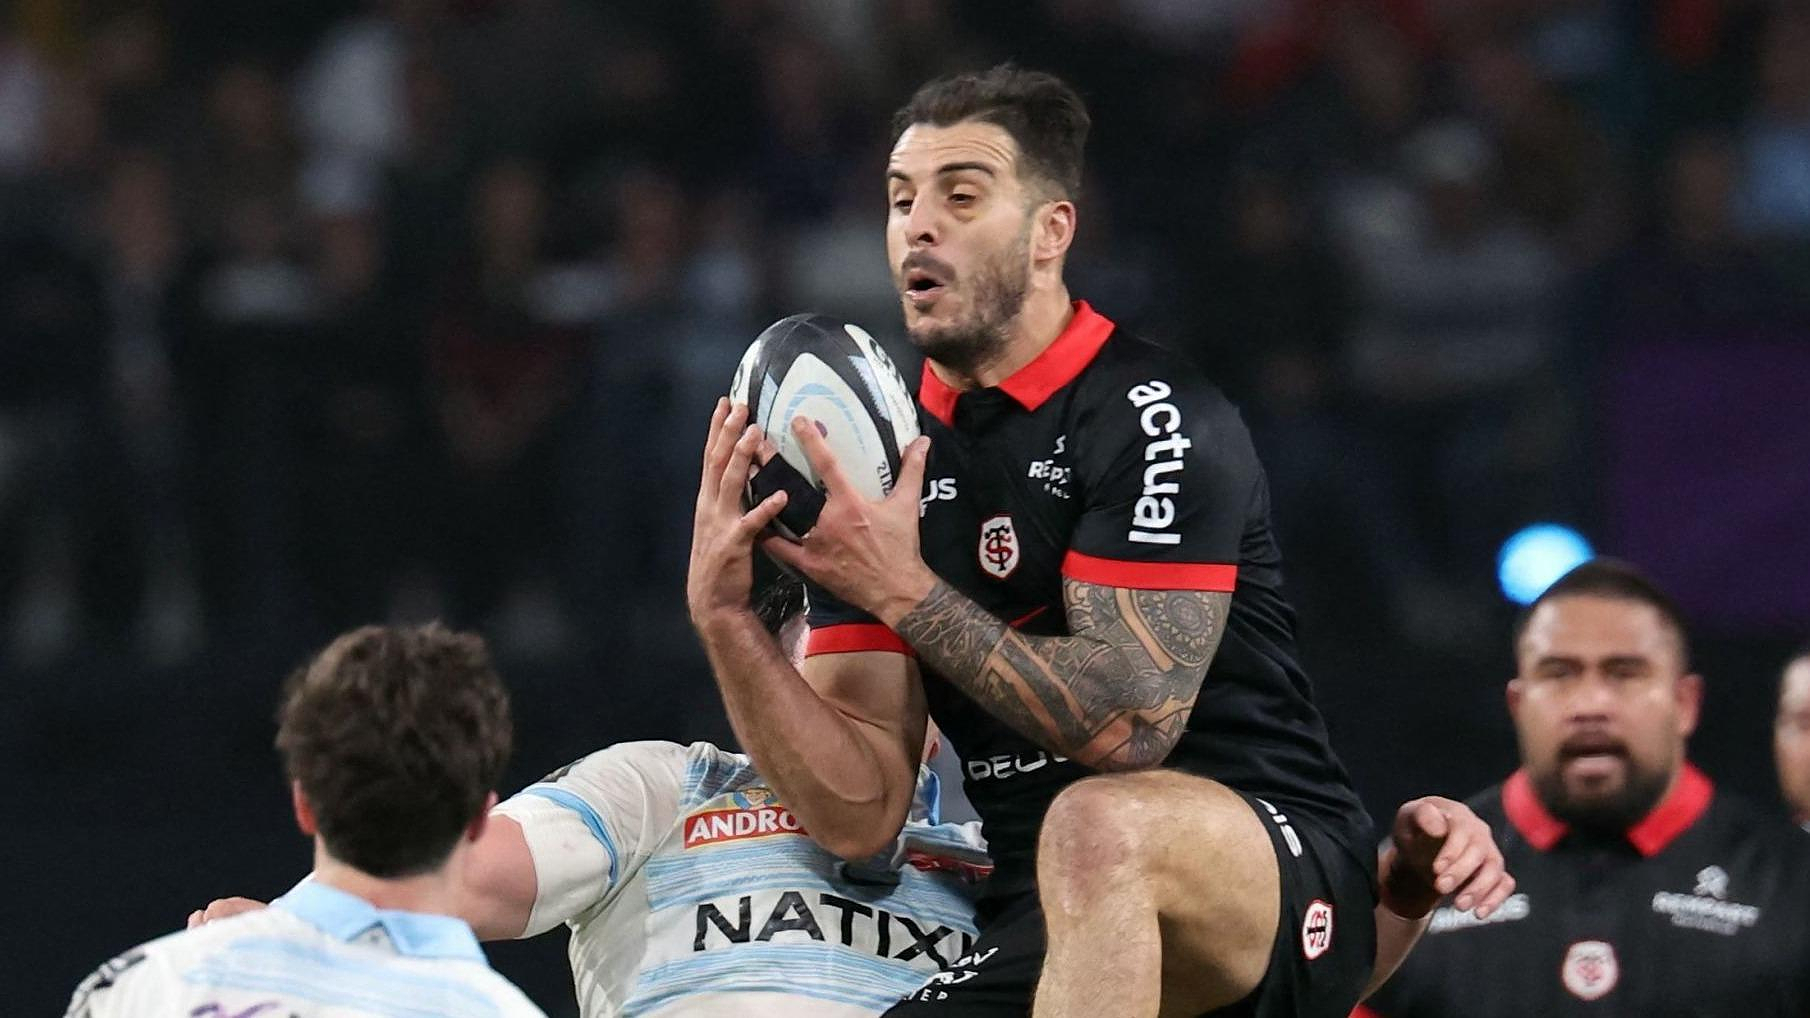 Top 14: “Duplicates? We’re used to it,” says Guitoune (Toulouse)